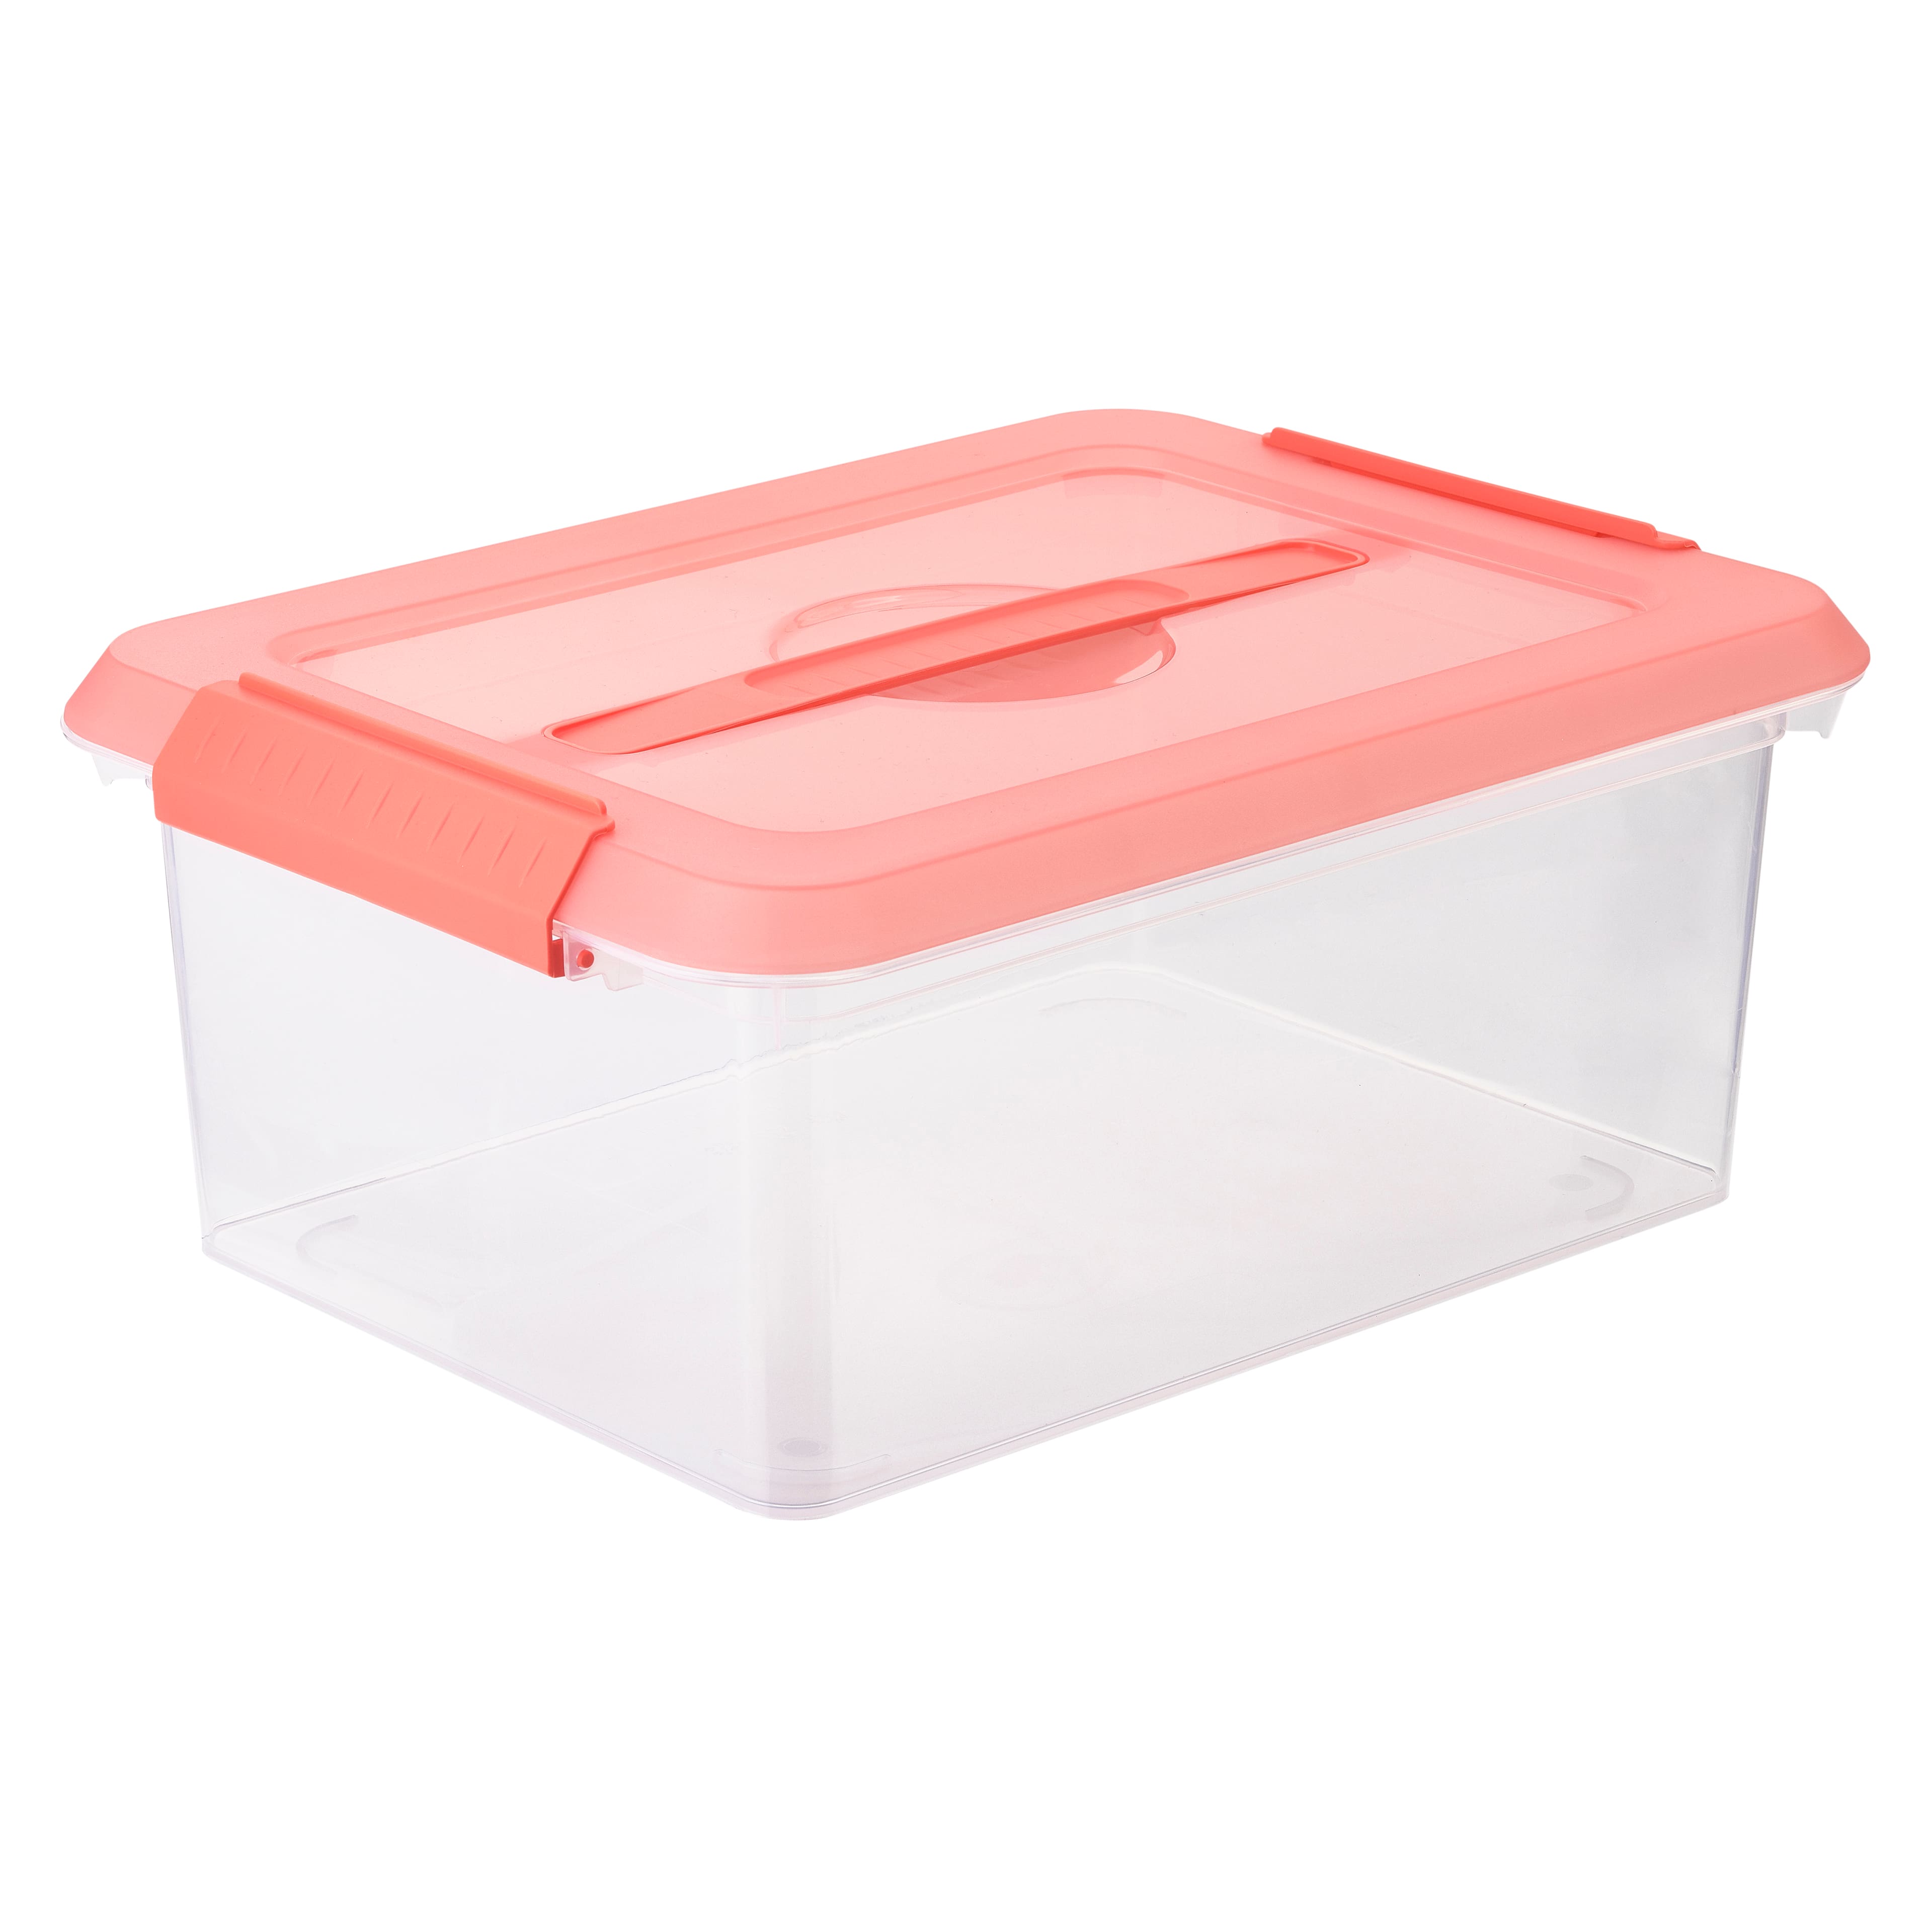  BTSKY Stack & Carry Box, Clear Plastic Storage Container  Stackable Home Utility Box